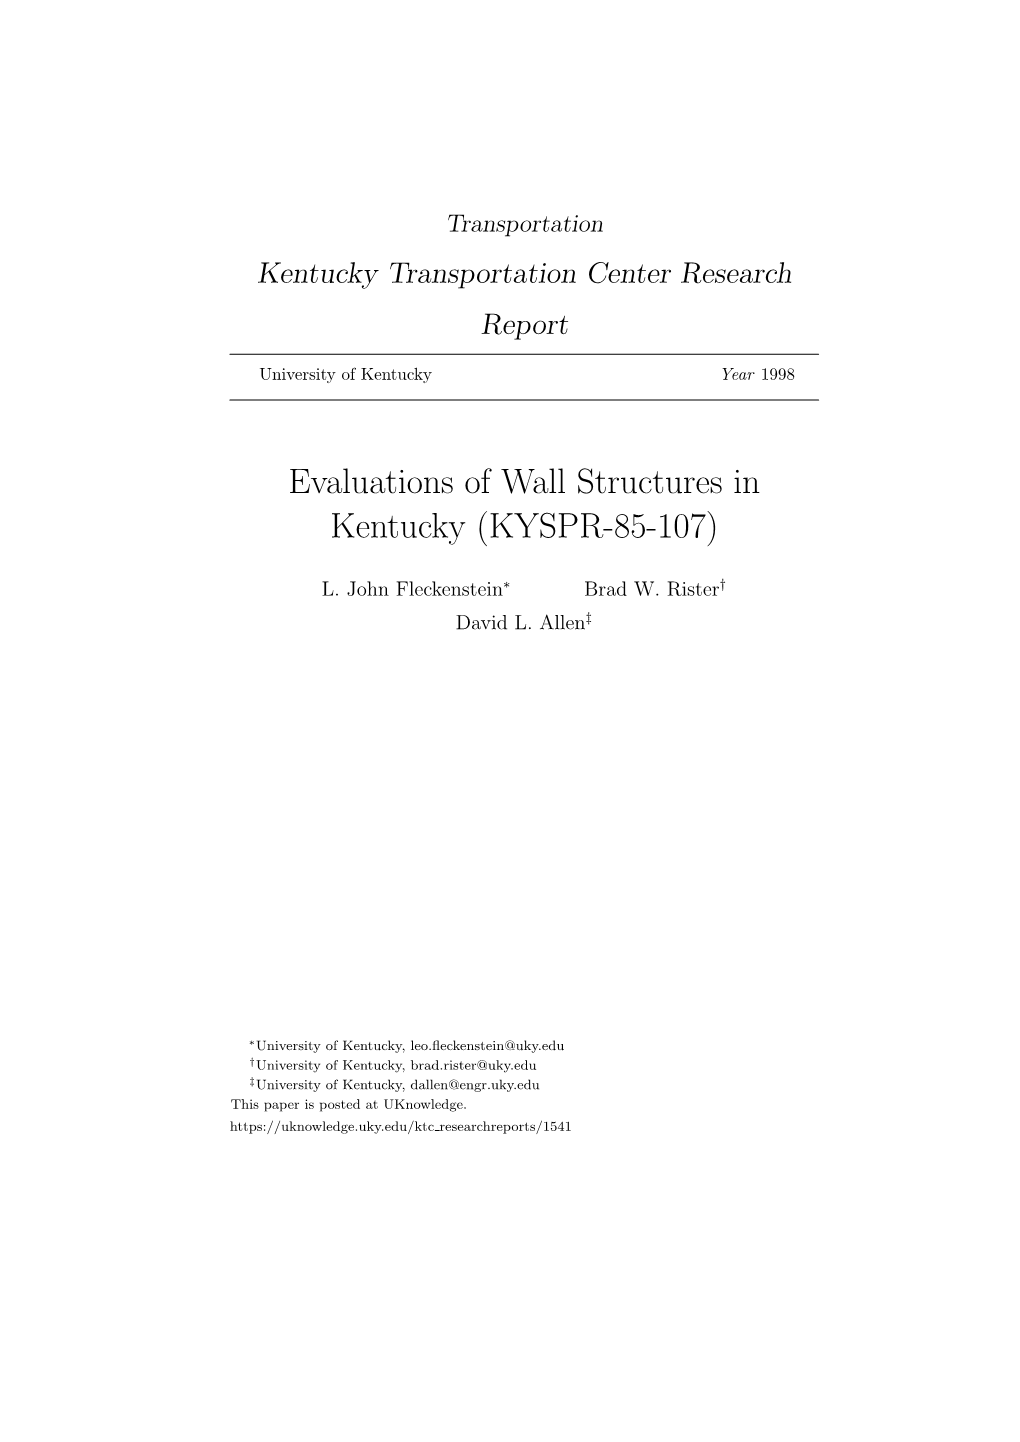 Evaluations of Wall Structures in Kentucky (KYSPR-85-107)